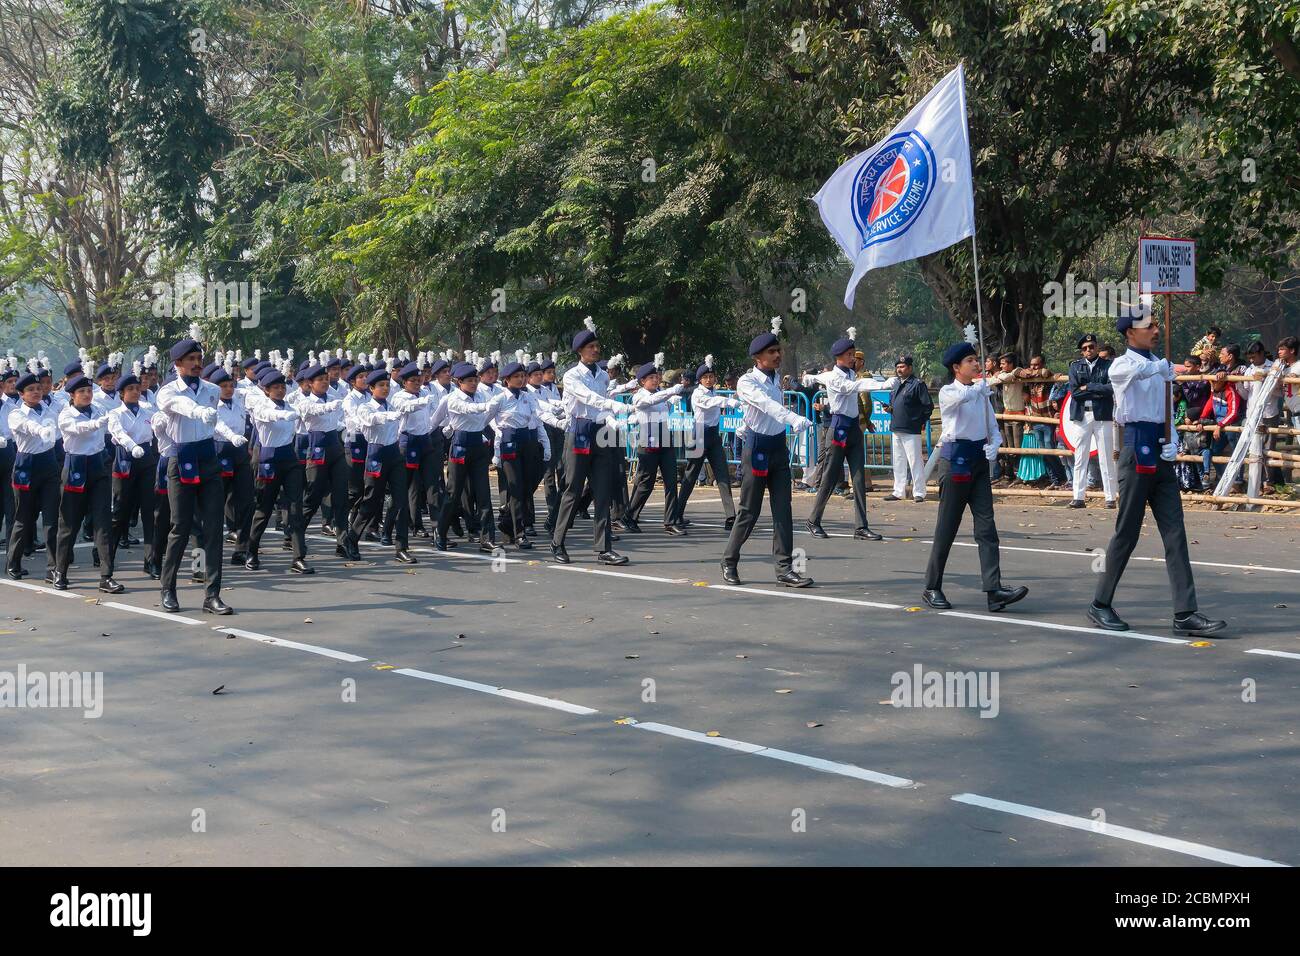 Kolkata, West Bengal, India - 26th January 2020 : India's National Service Scheme (NSS) cadets are marching past with flag, for Indian Republic day. Stock Photo